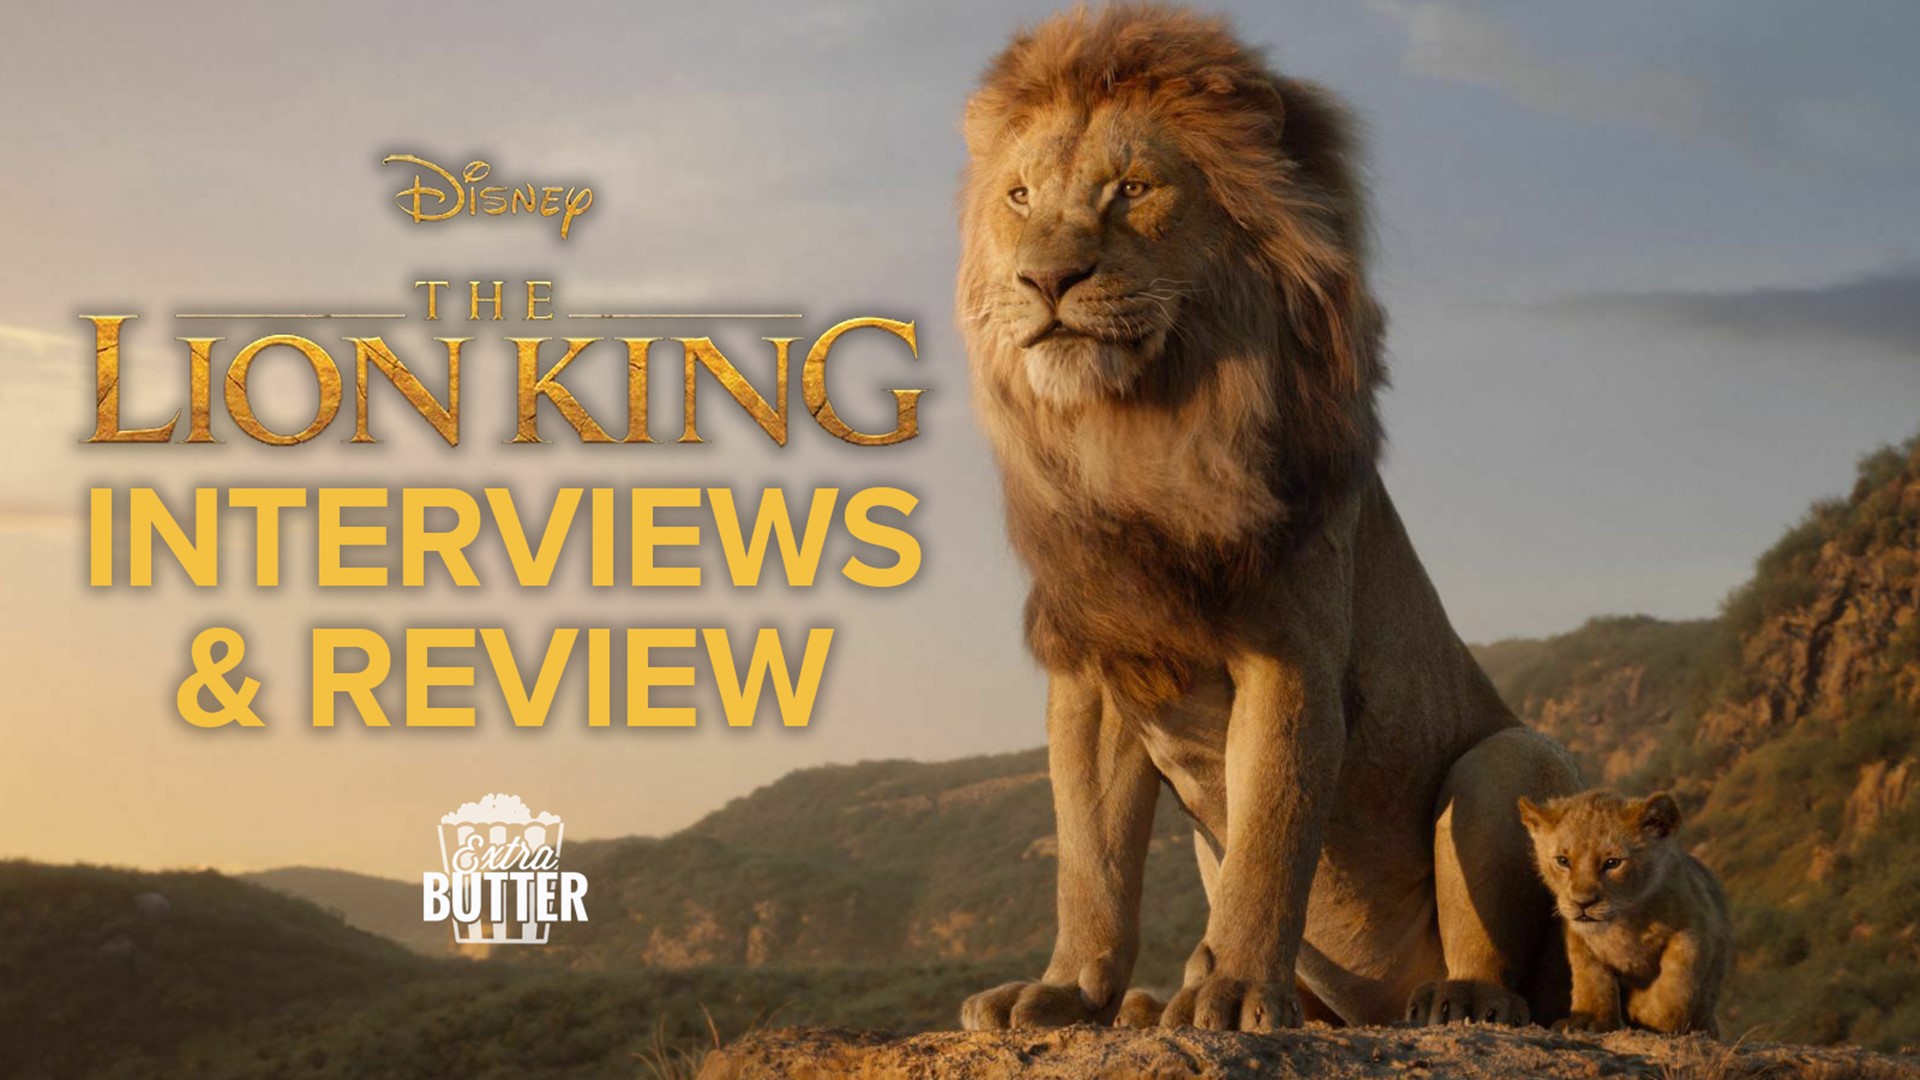 Extra Butter reviews the new version of 'The Lion King.' Mark S. Allen also talks with Chiwetel Ejiofor & Alfre Woodard and get the two to answer a fan question.